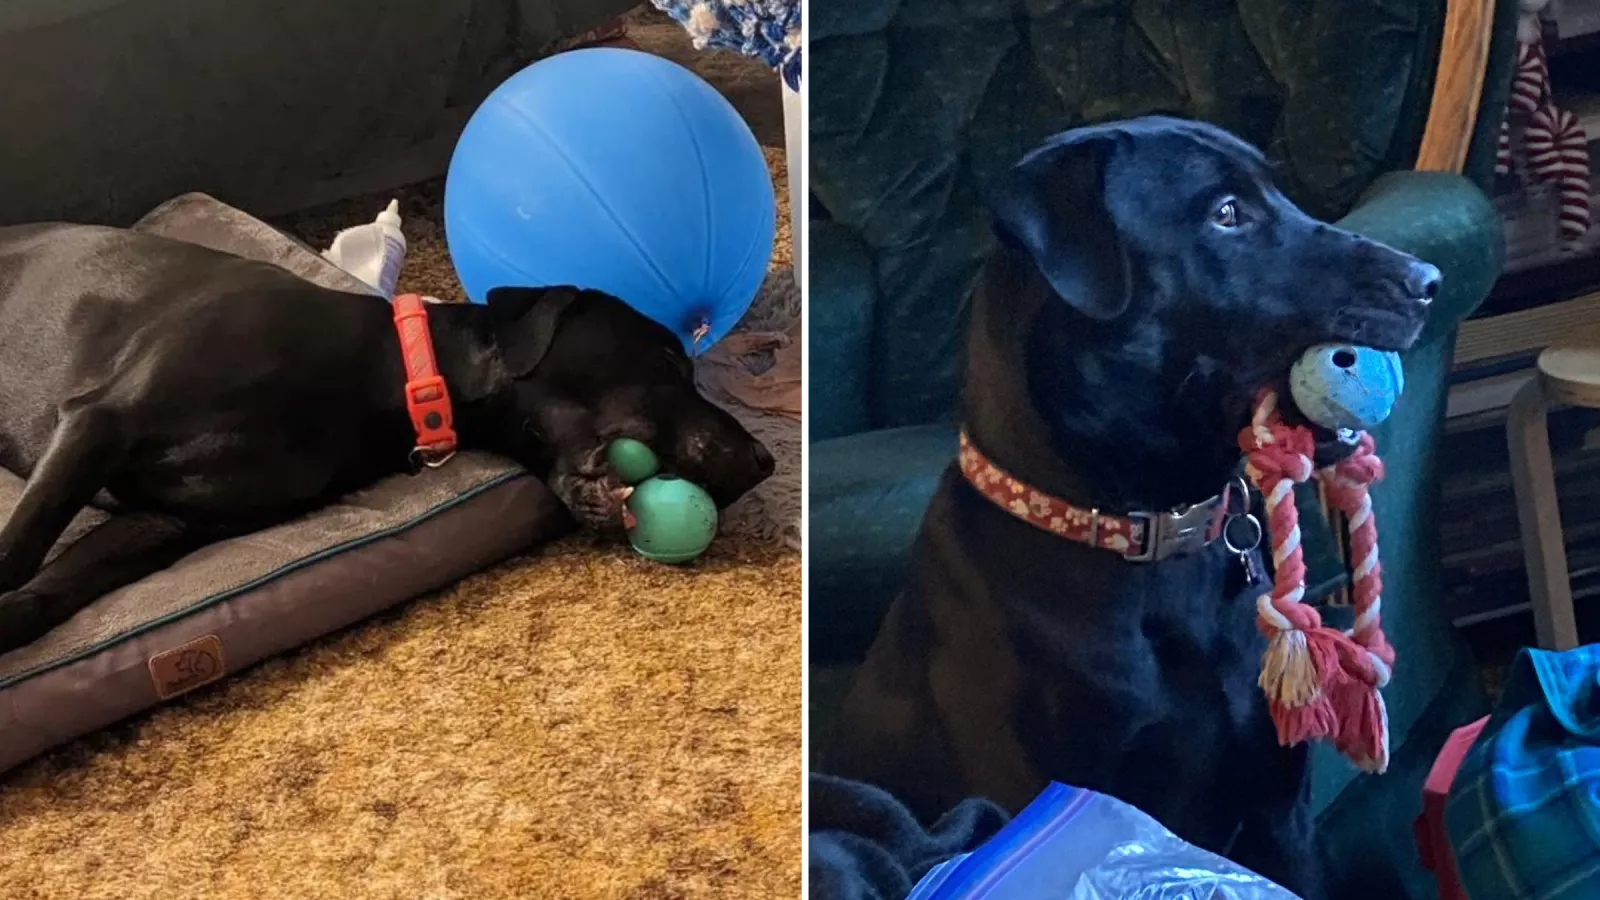 Rescue Dog Sleeping With Toys in His Mouth Melts Hearts: 'Comfort